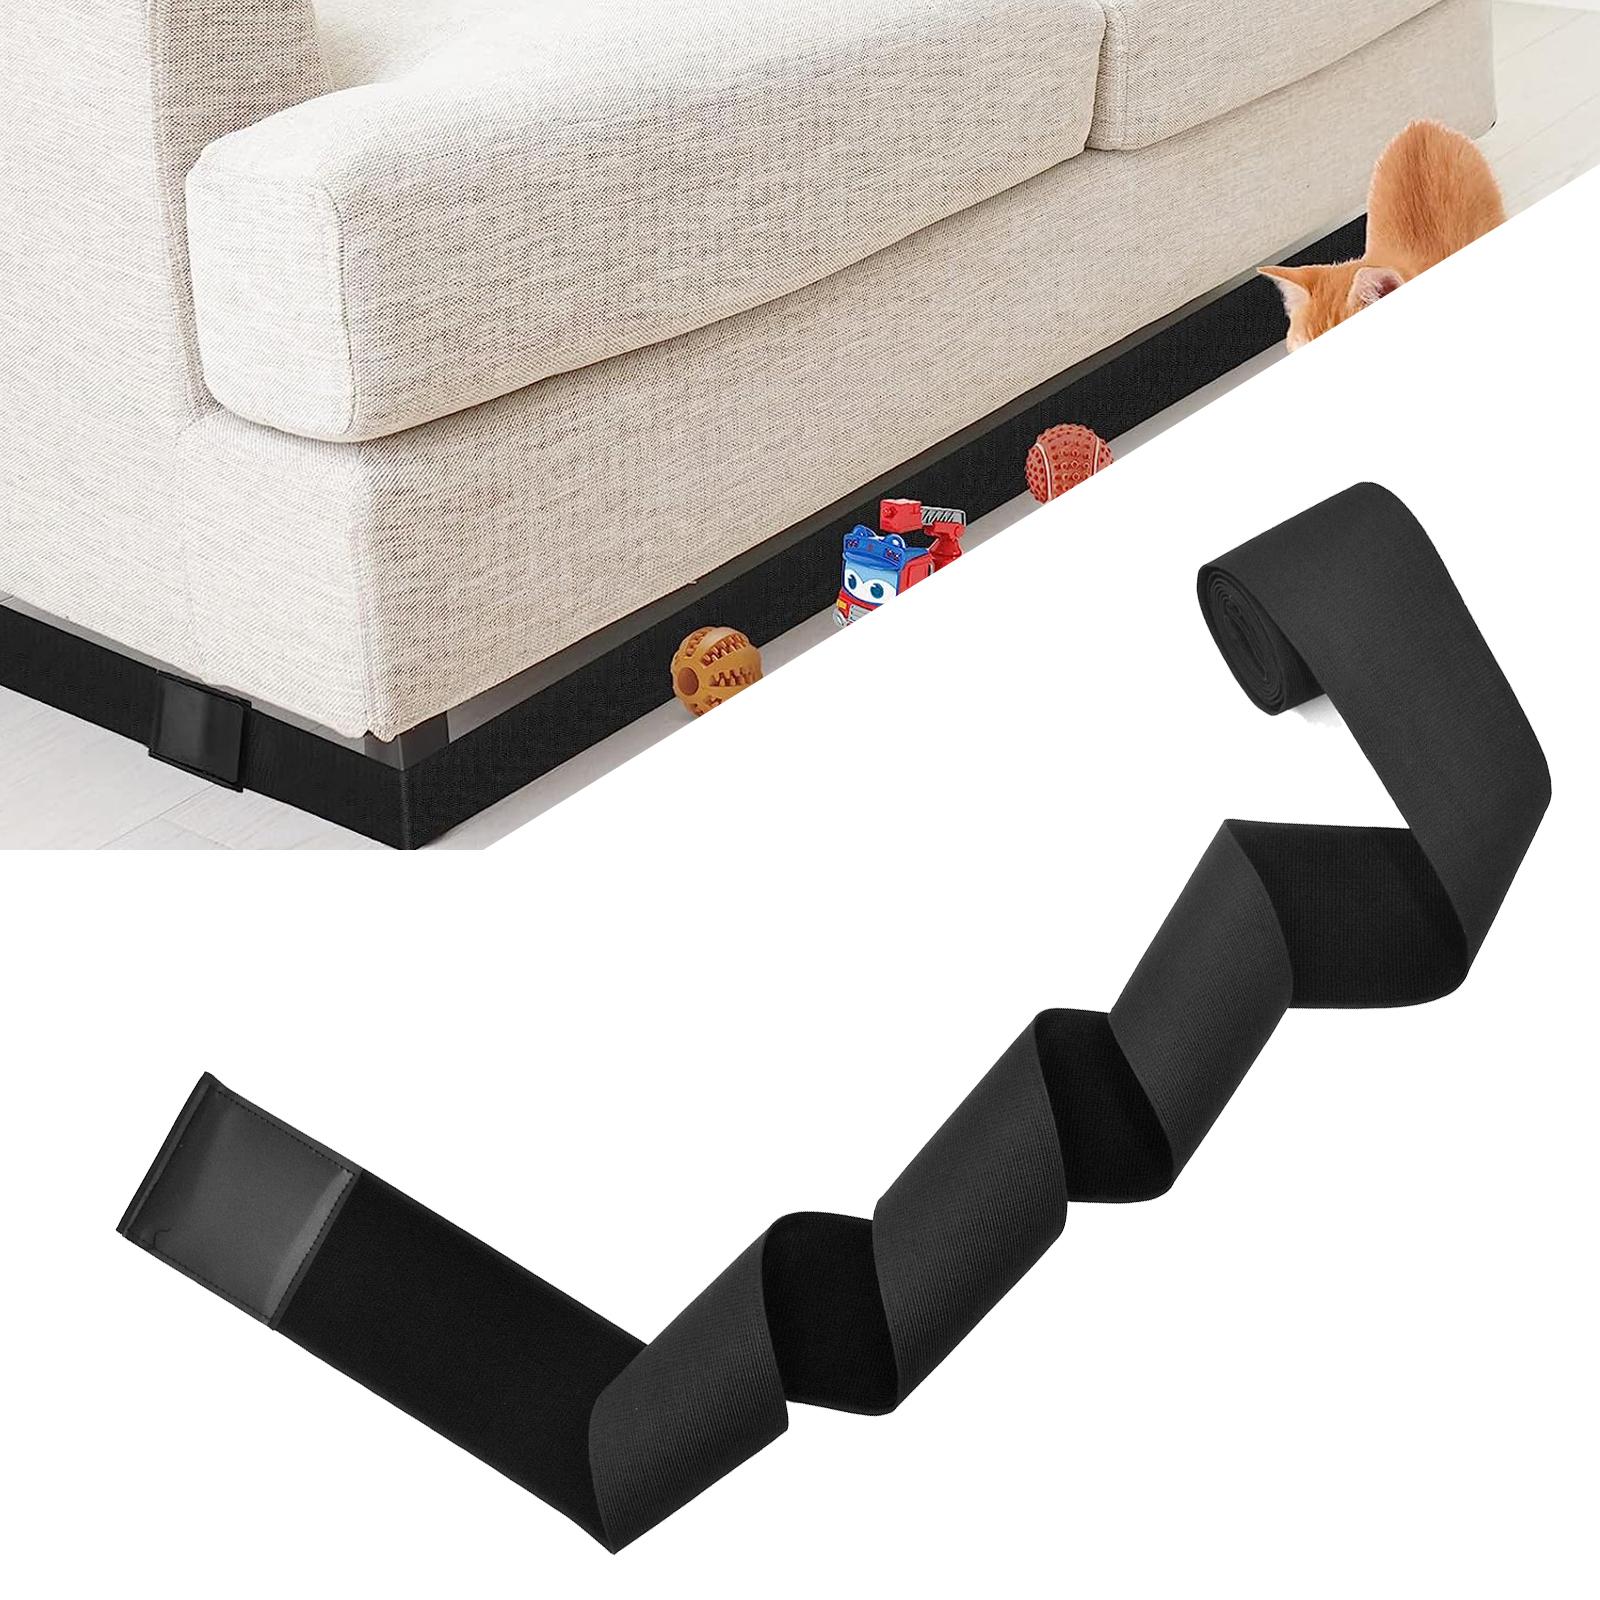 Under Couch Blocker for Toys Easy to Install Toy Blockers for Under Sofa Bed 15cmx1meter